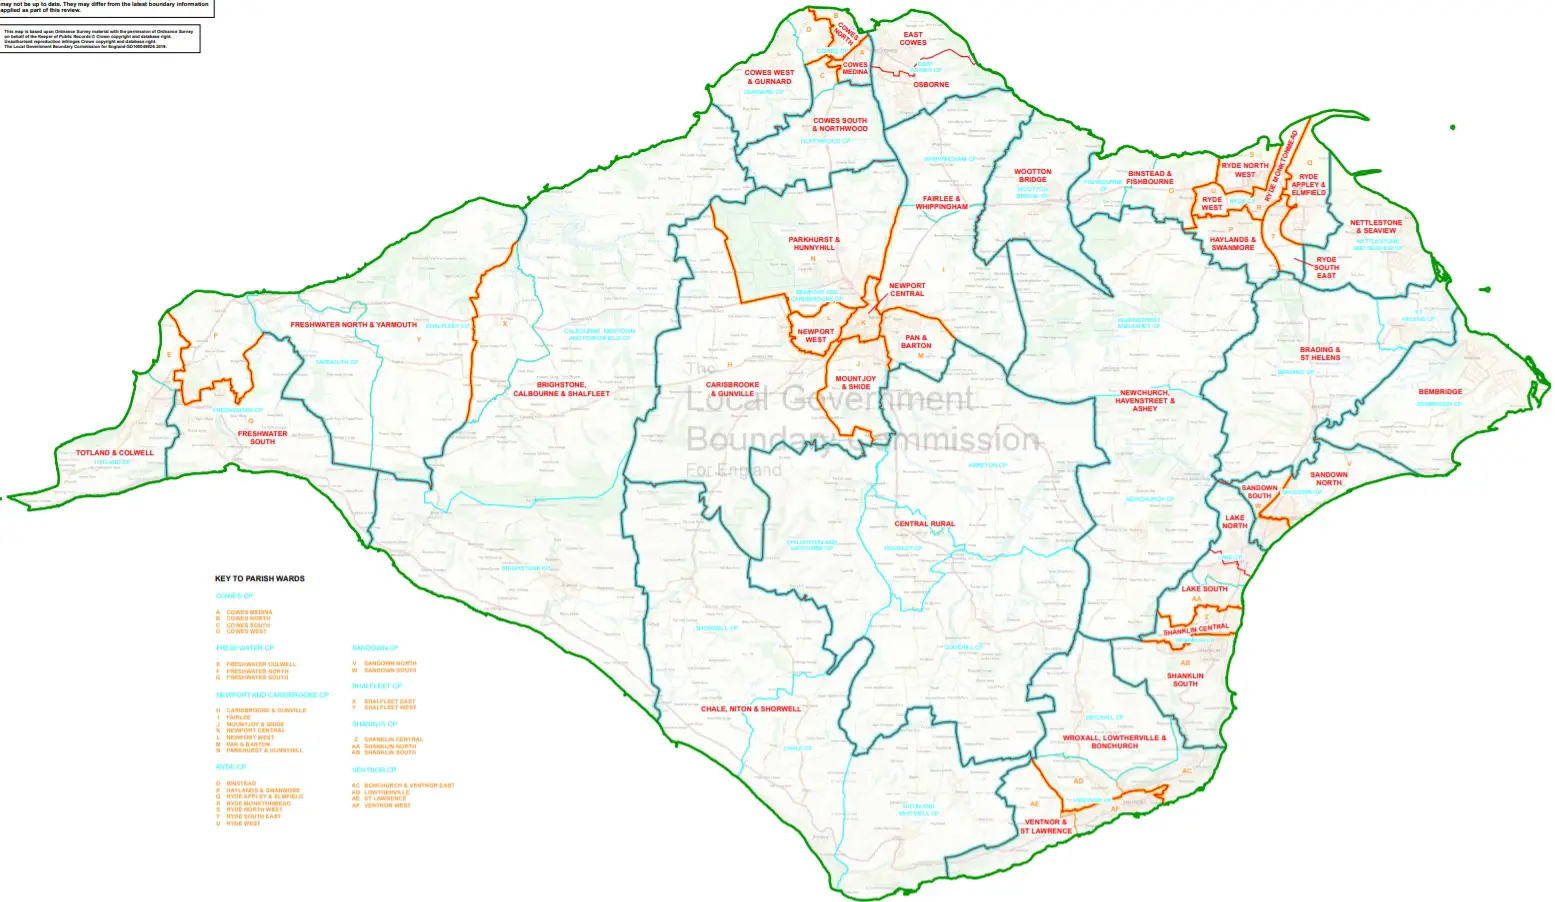 The revised boundary map